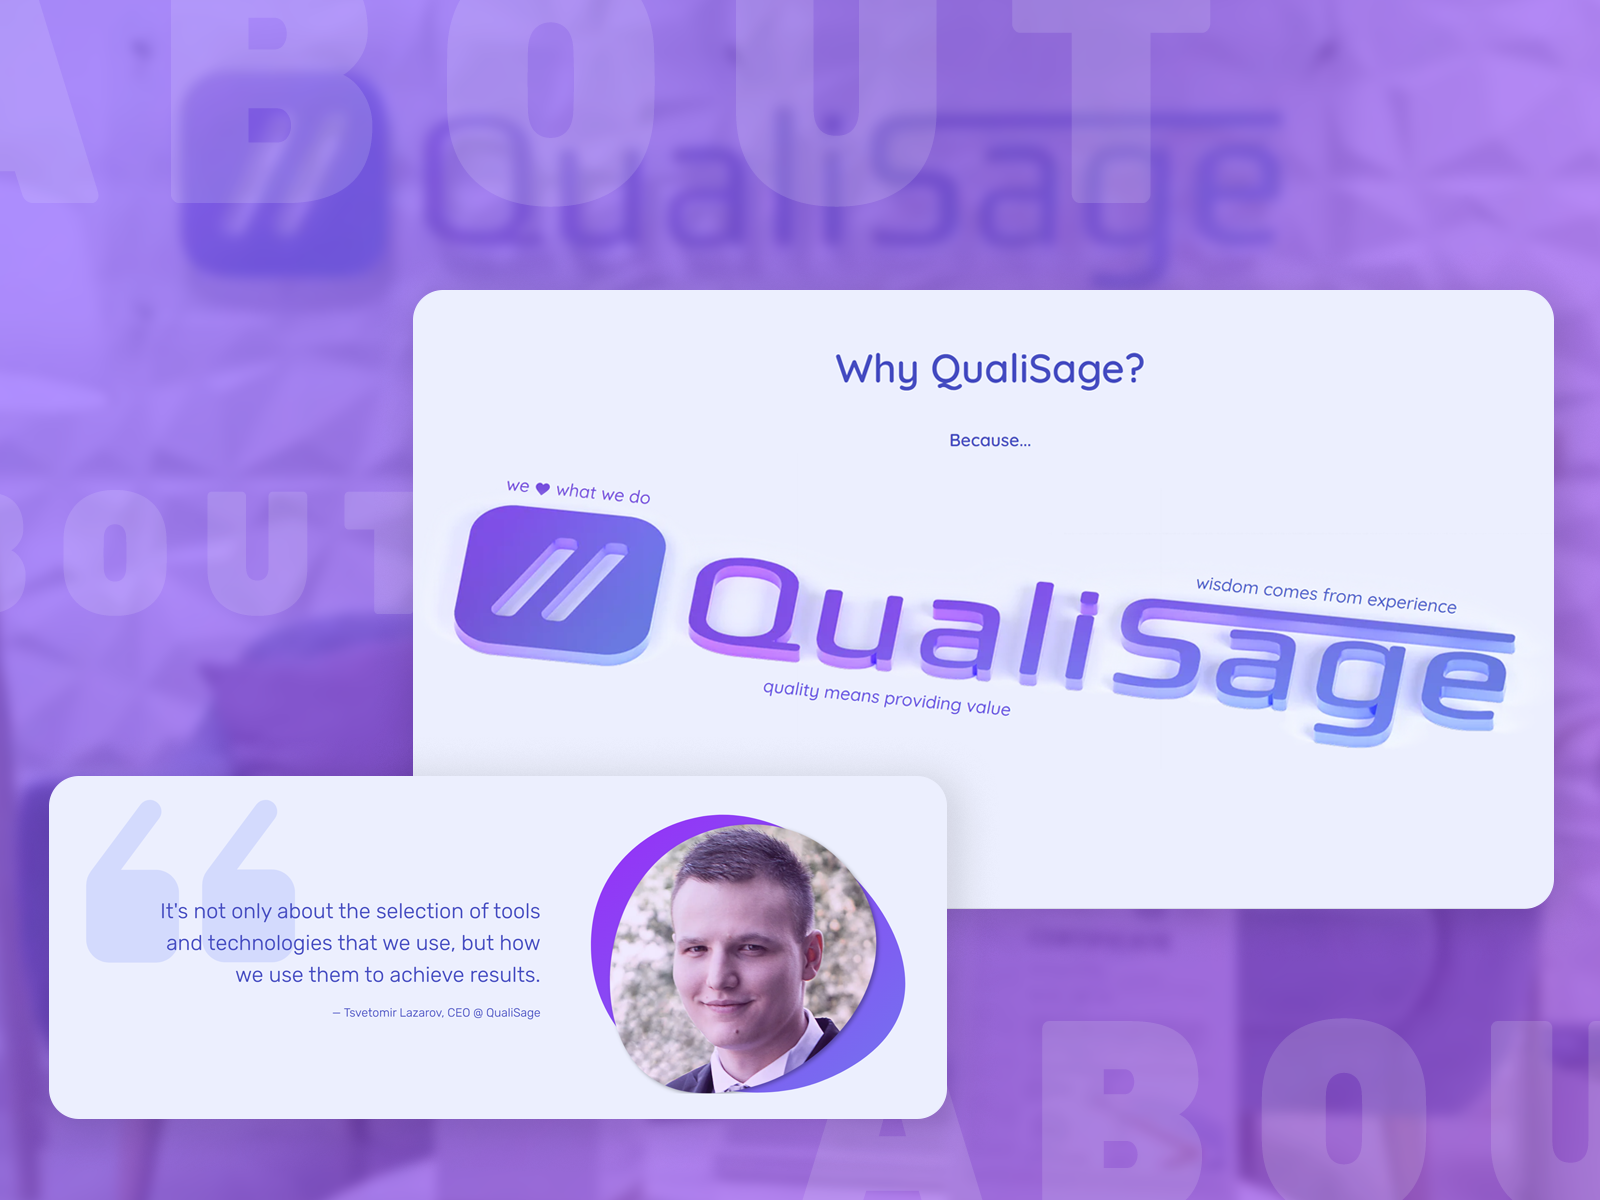 About QualiSage